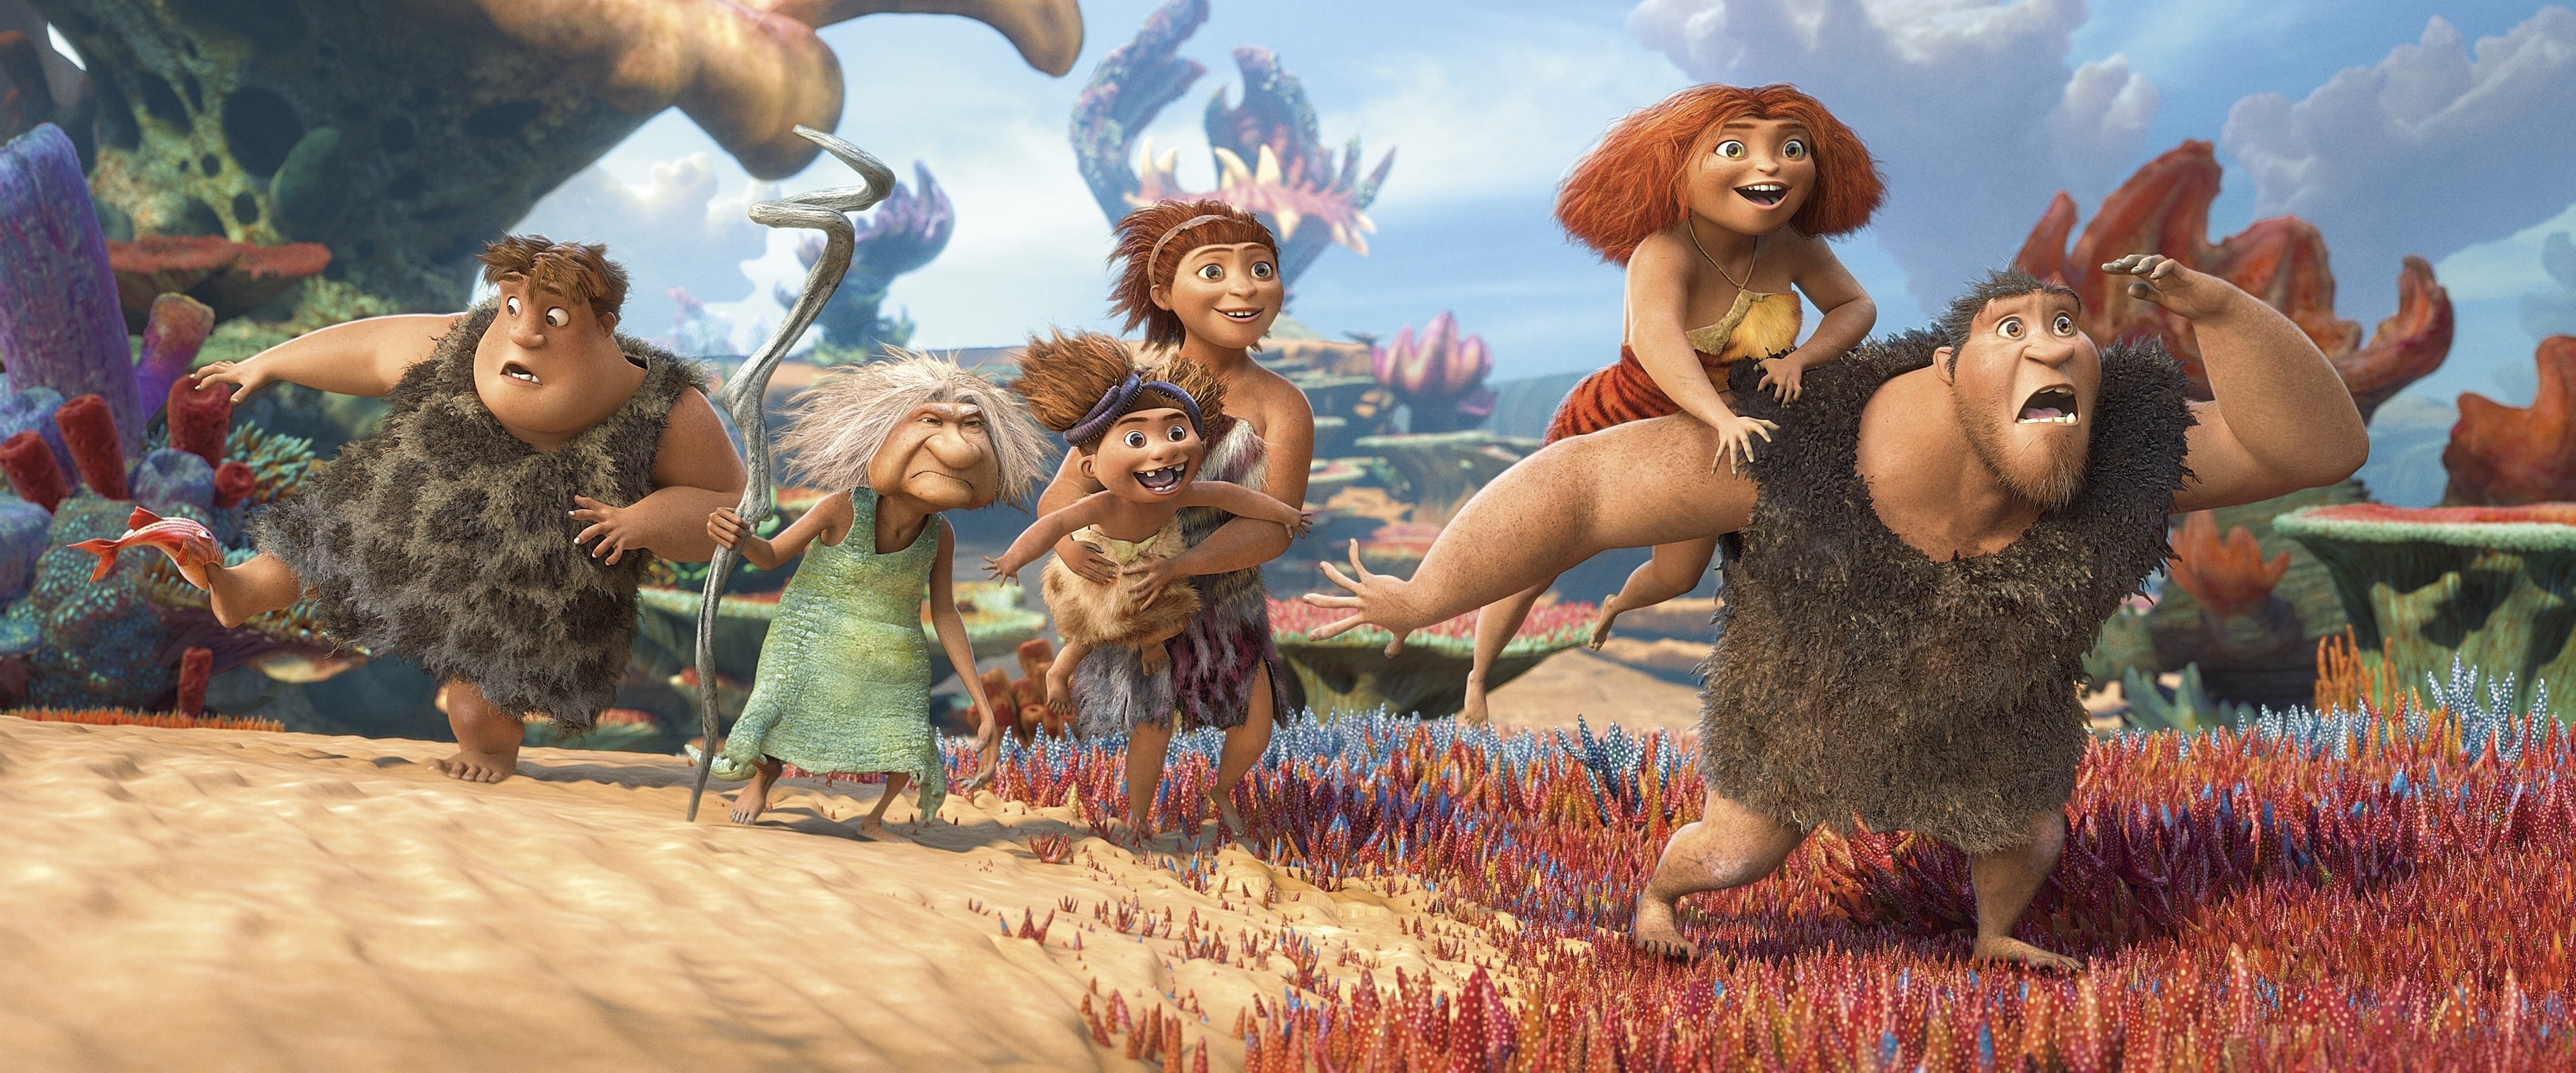 movie, the croods: a new age, eep (the croods), gran (the croods), grug (the croods), guy (the croods), sandy (the croods), the croods 2, thunk (the croods), ugga (the croods)